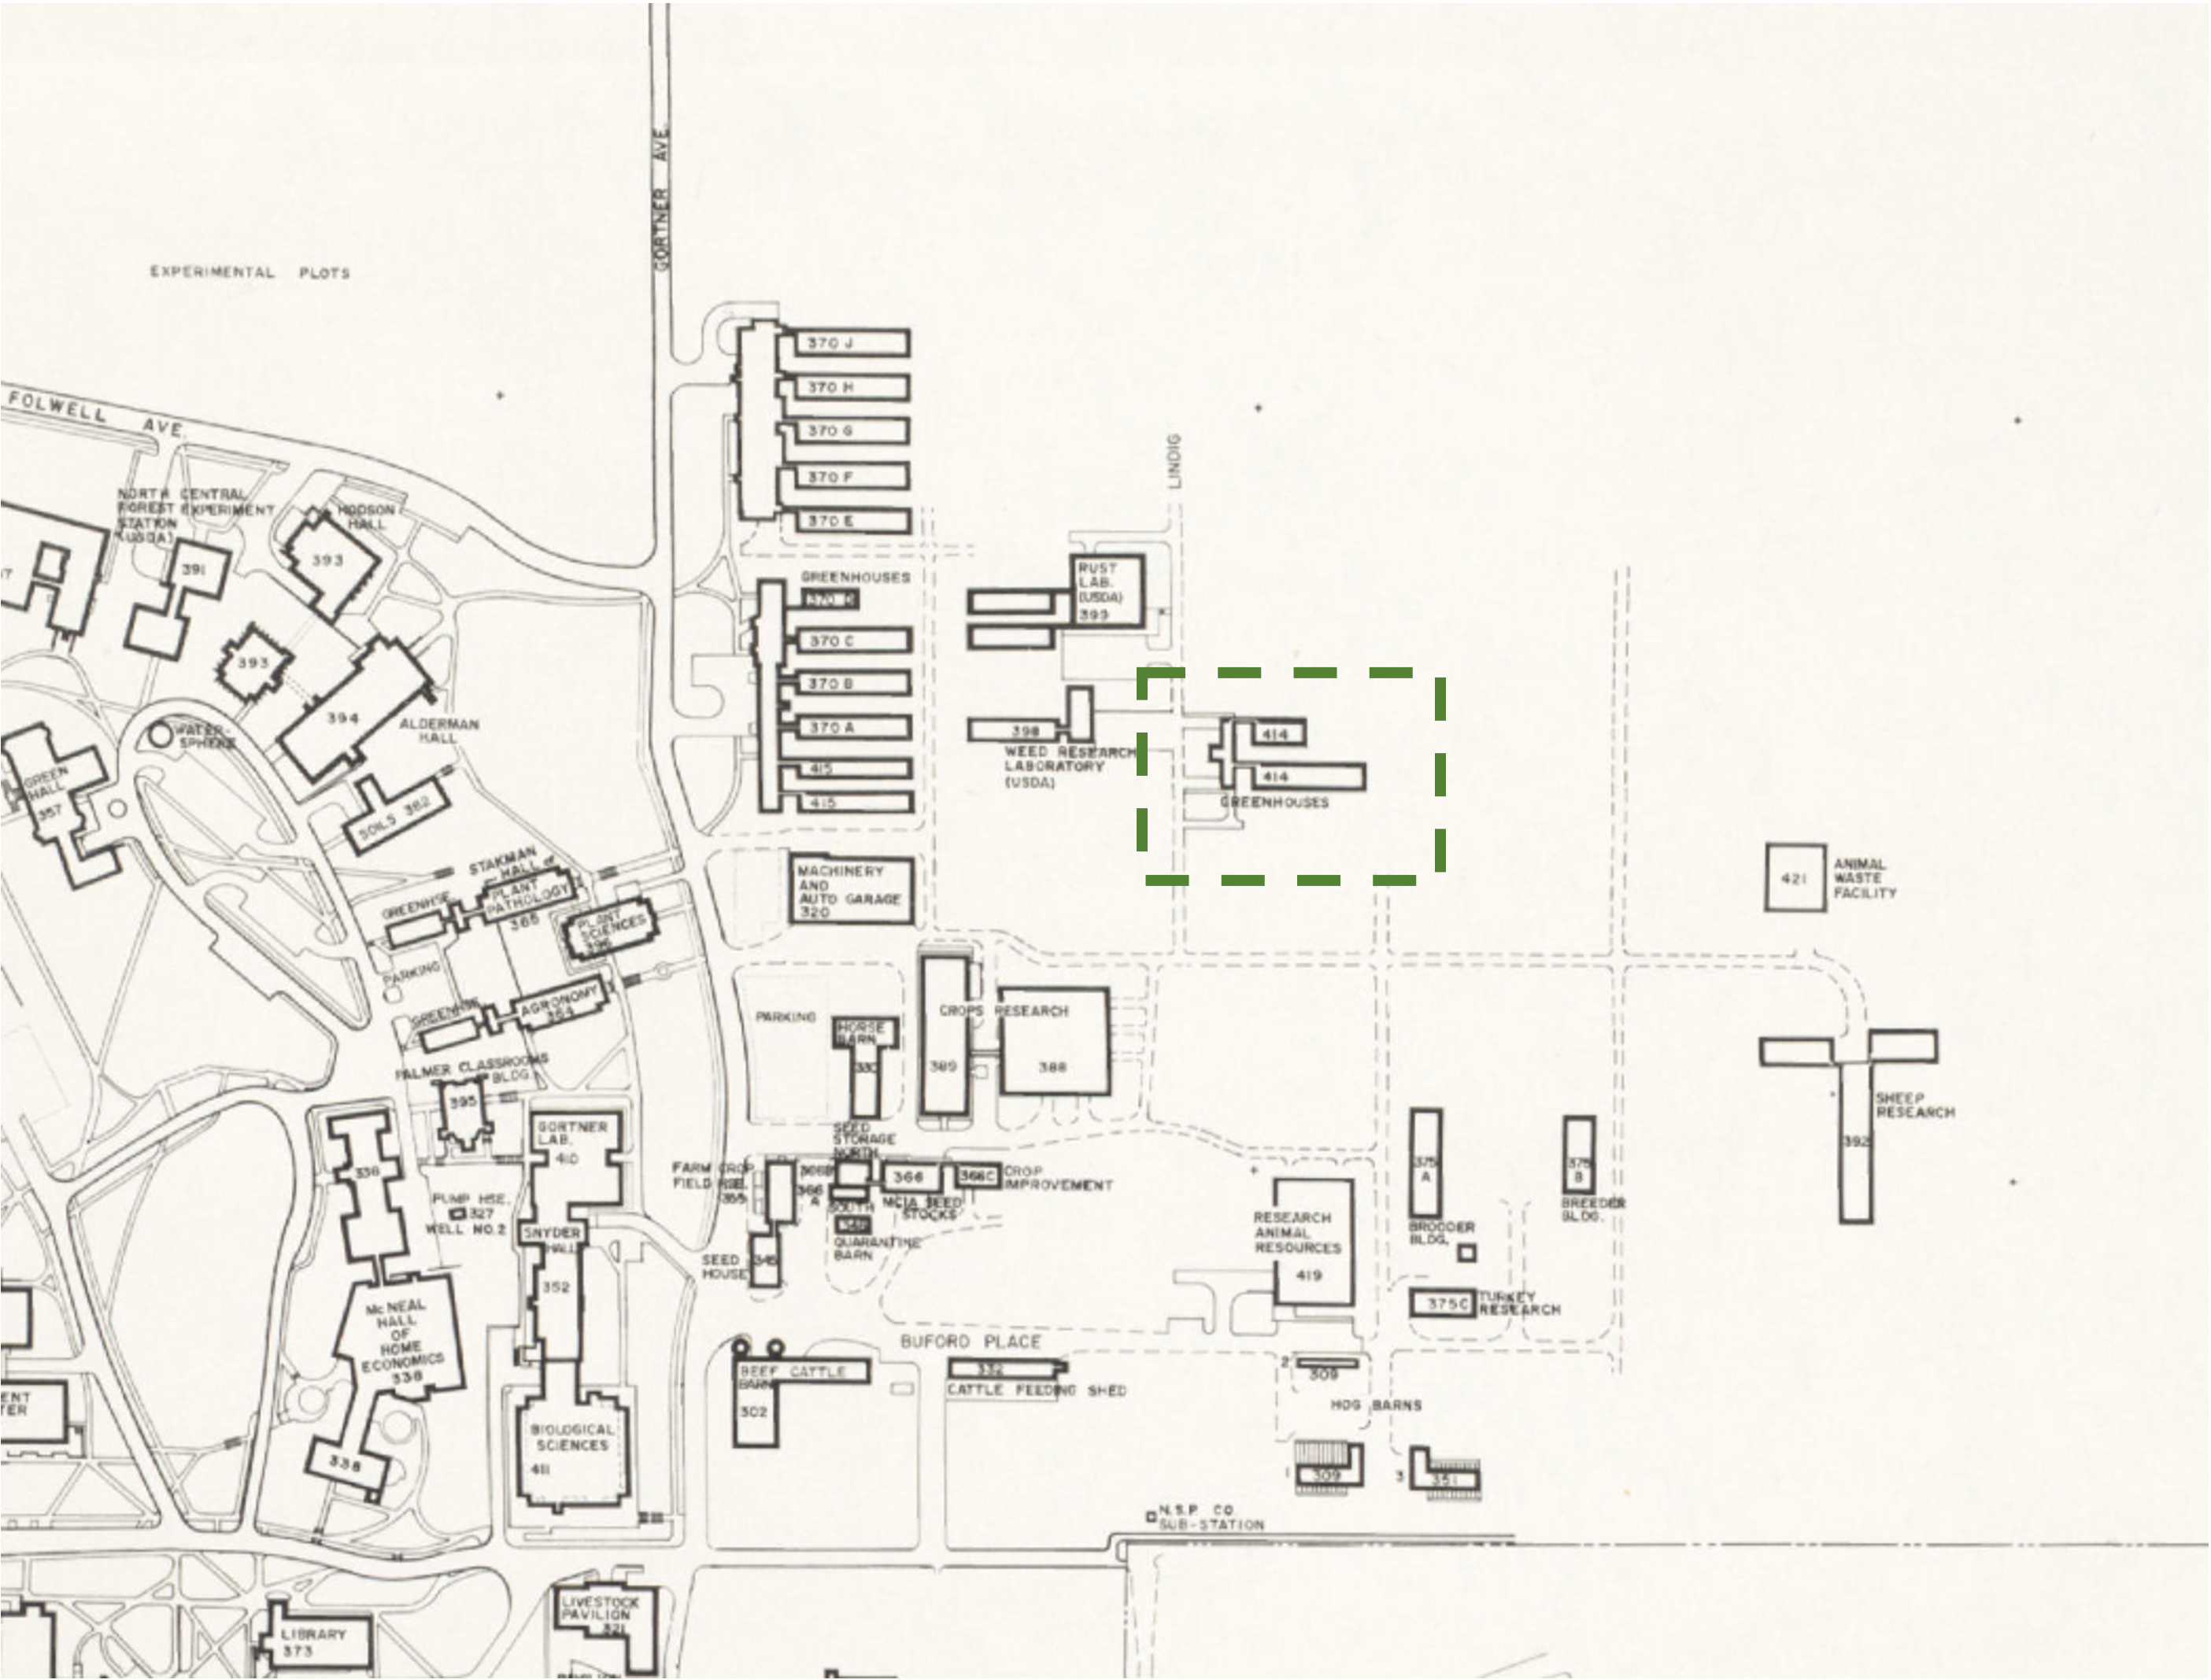 Map of the St. Paul Campus with the CBS greenhouses highlighted in green